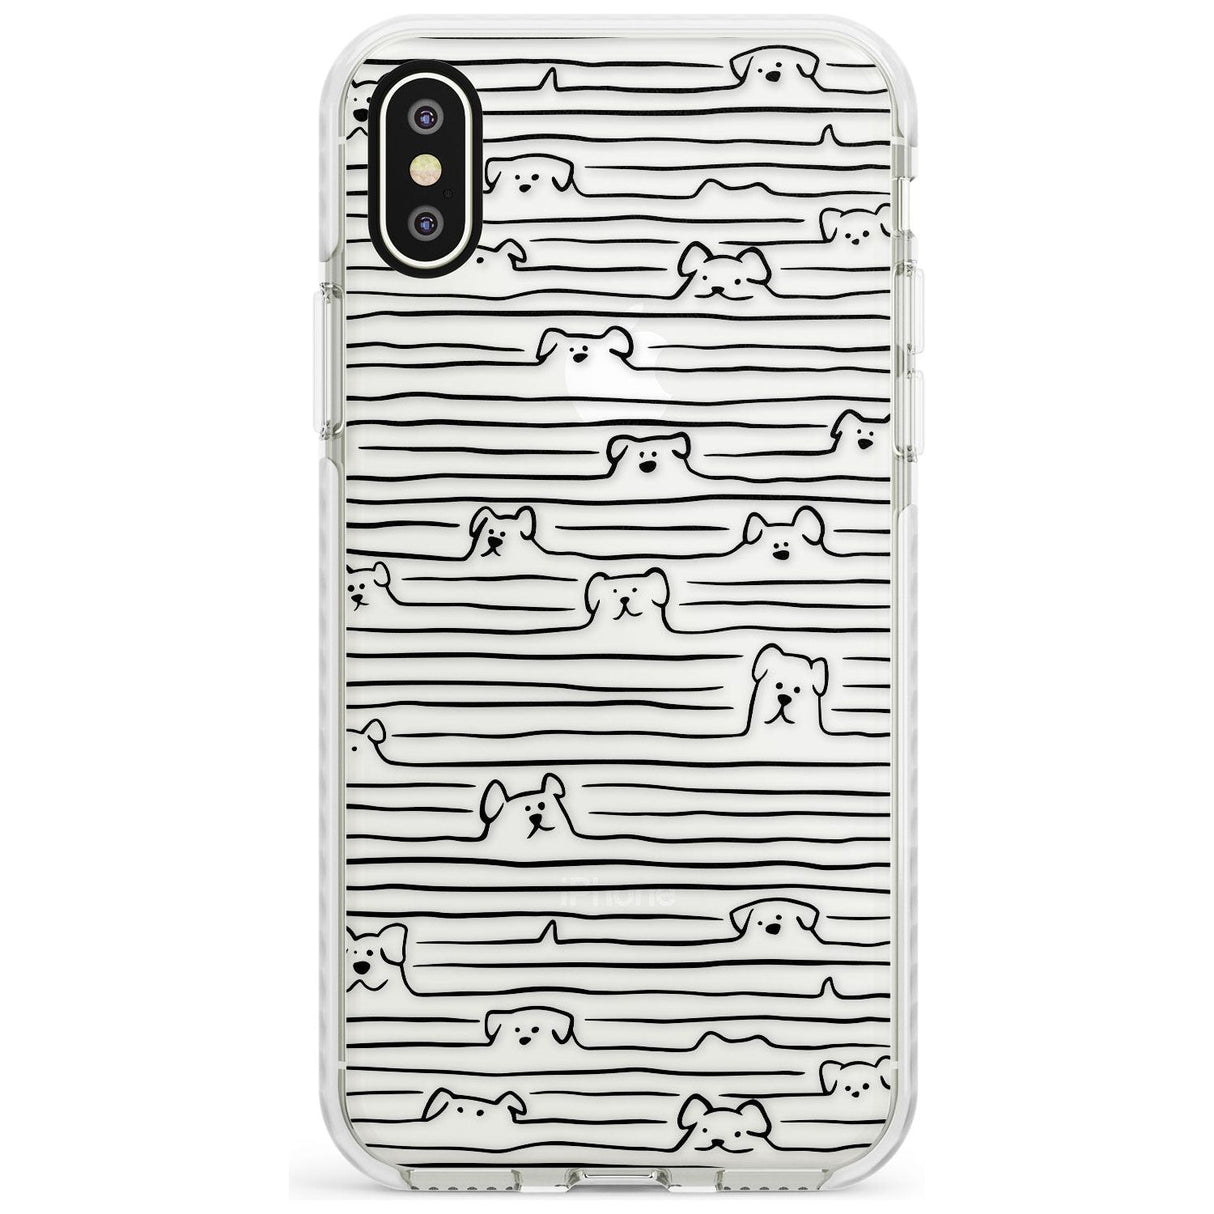 Dog Line Art - Black Impact Phone Case for iPhone X XS Max XR